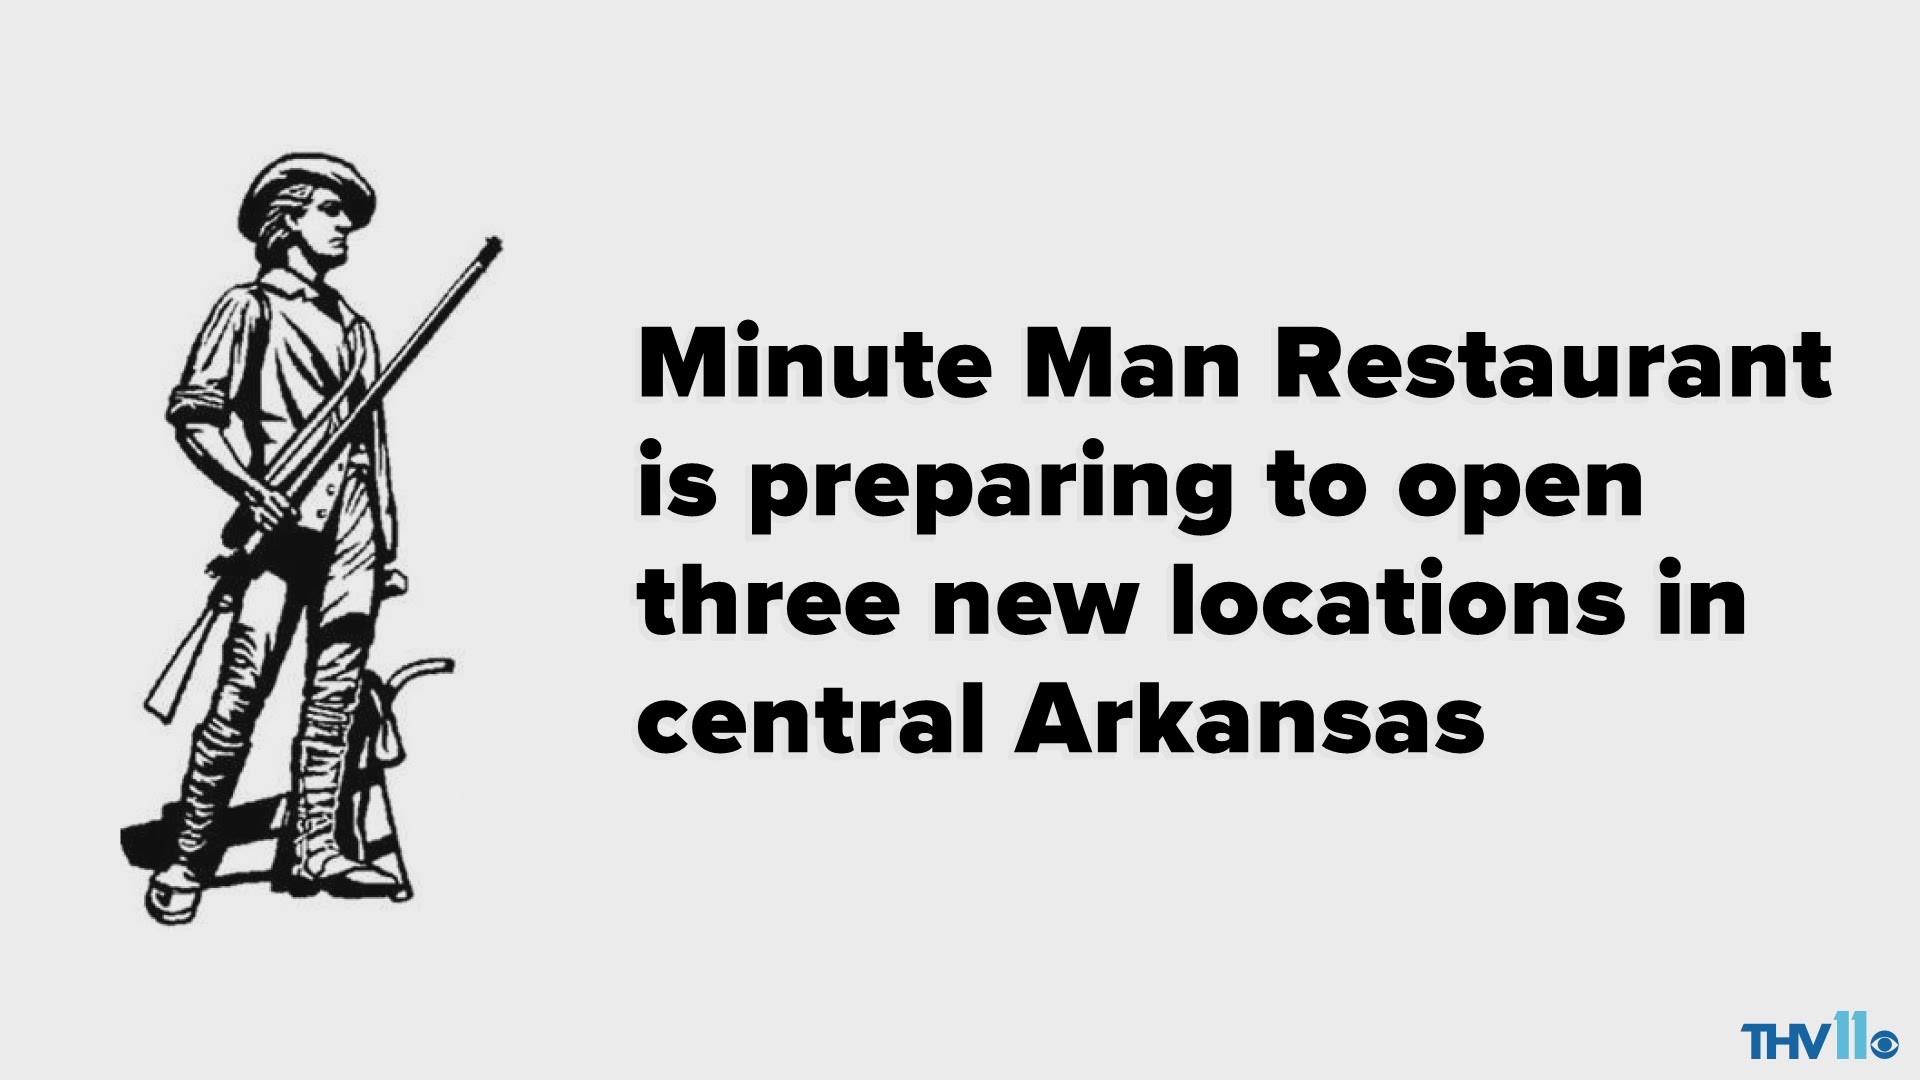 Minute Man Restaurant is planning to open three new locations.